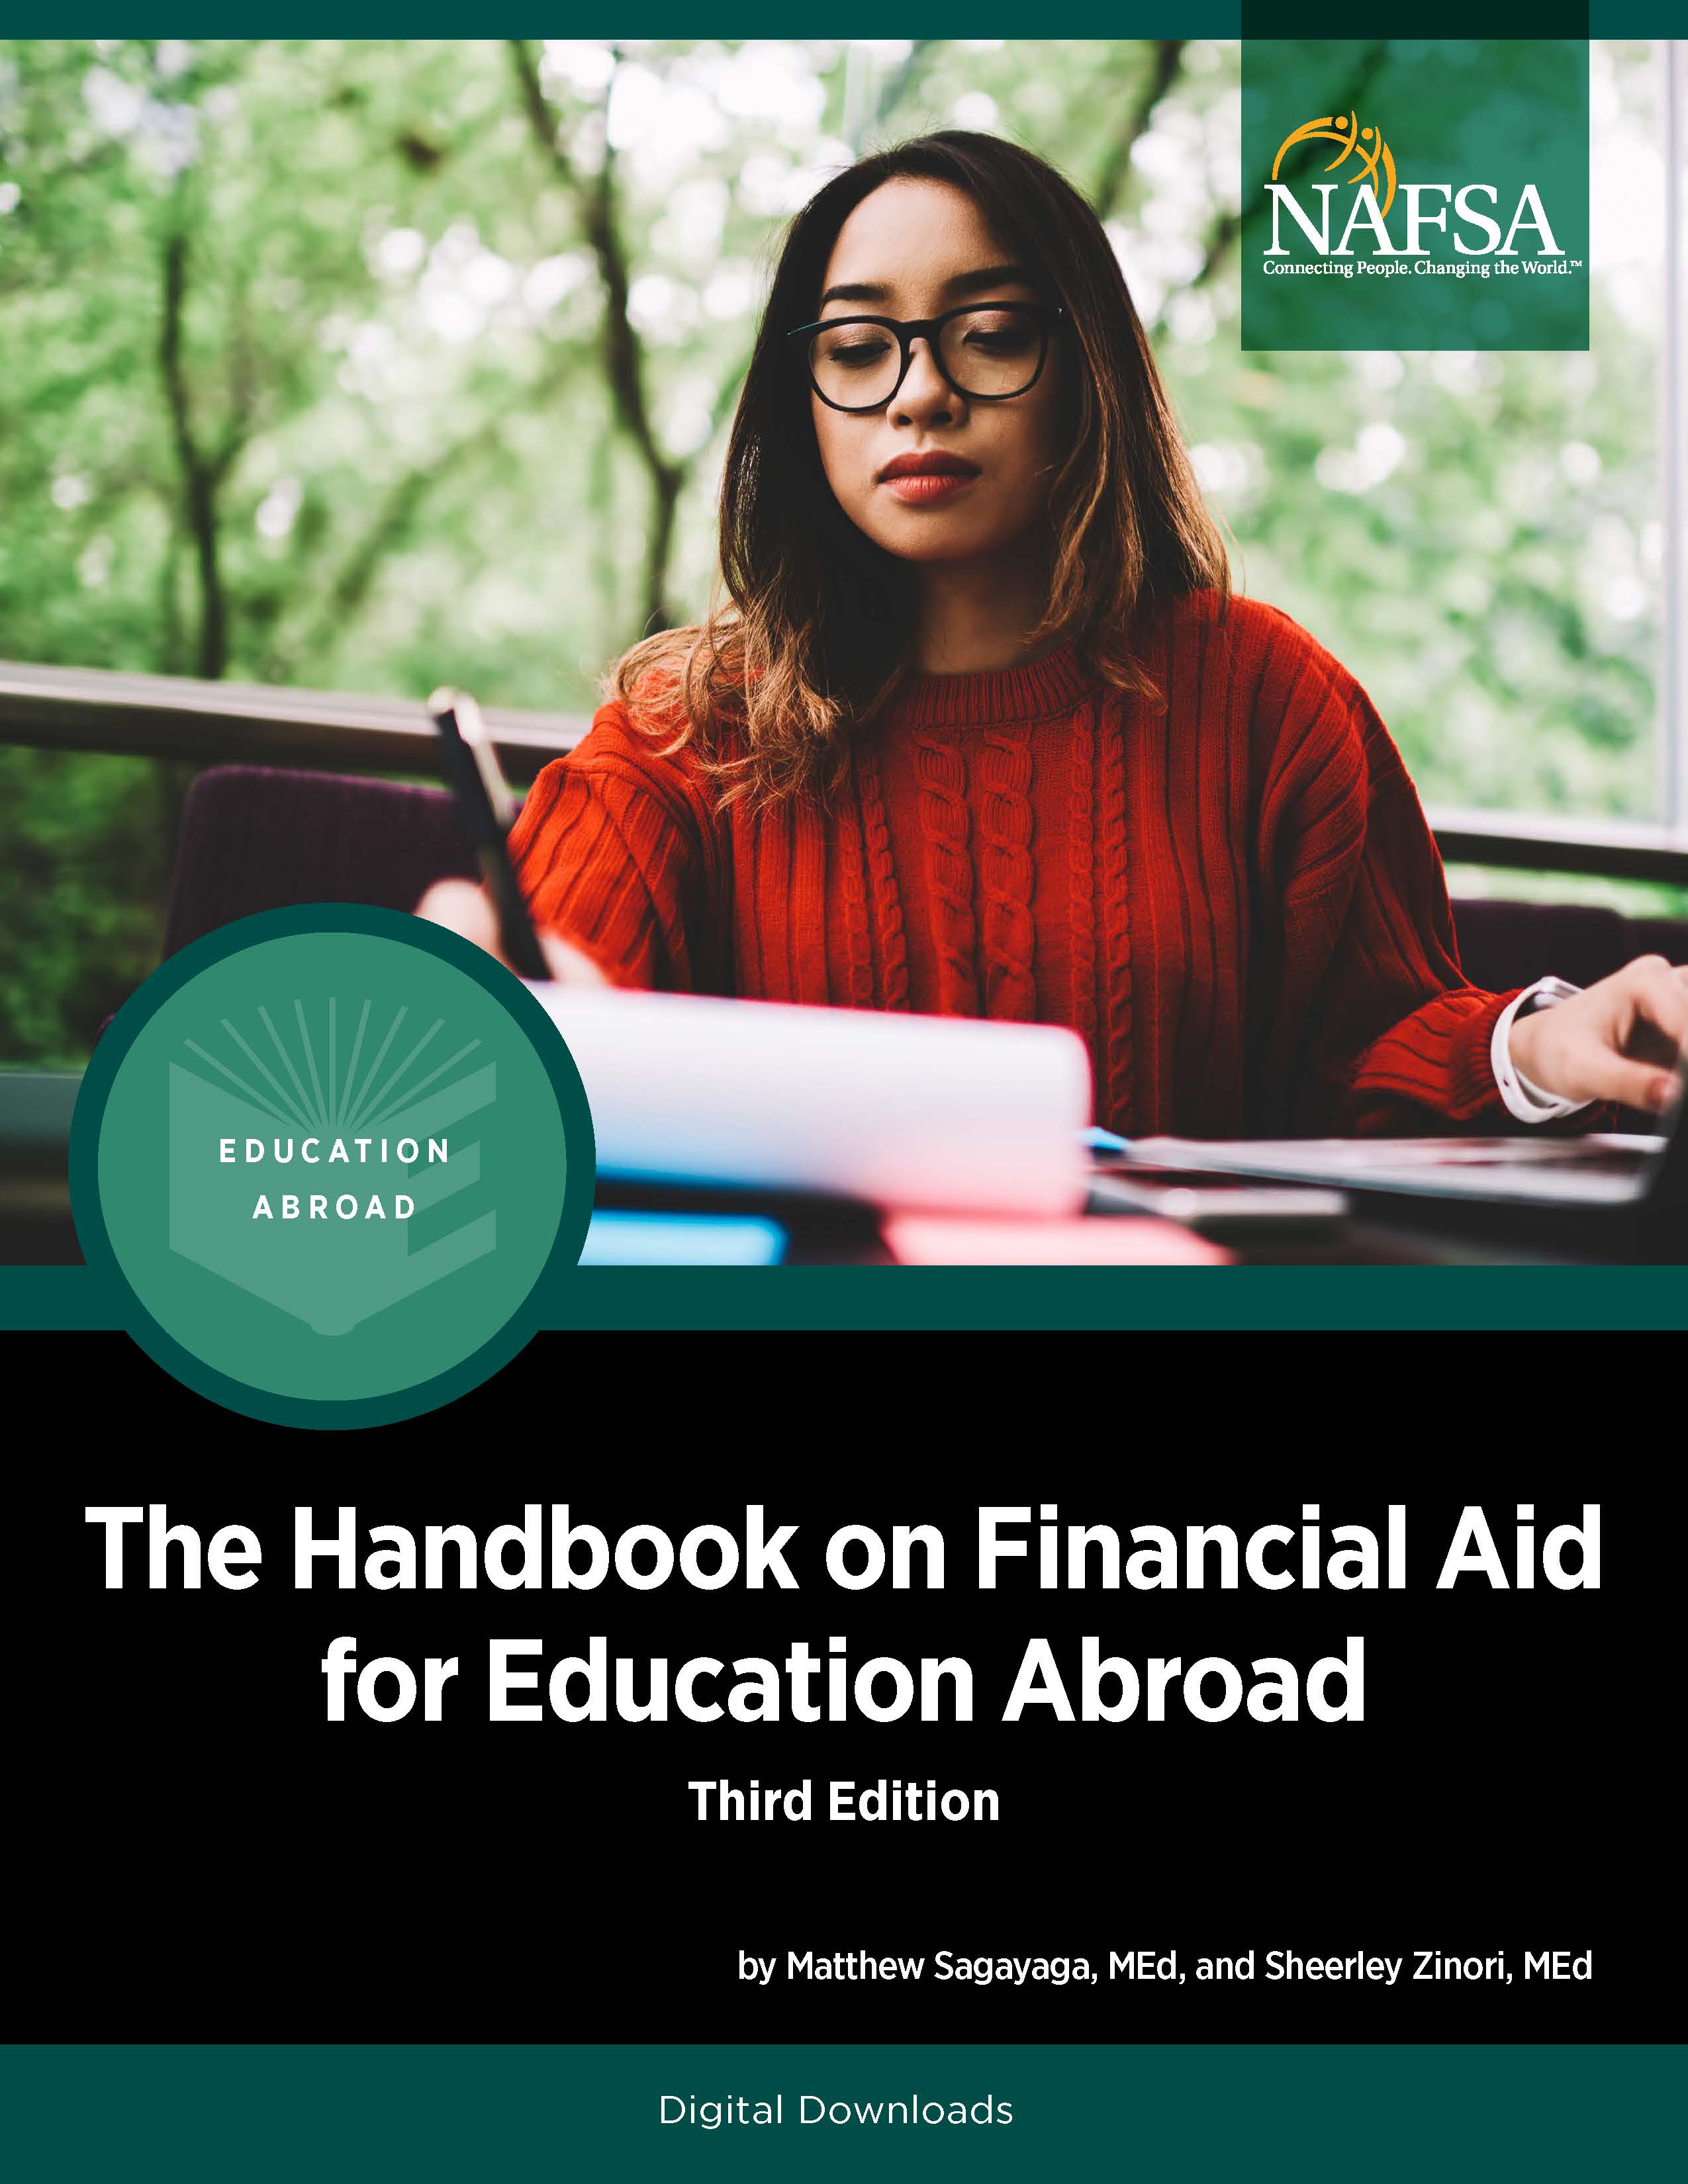 Cover of the Handbook o Financial Aid for Education Abroad